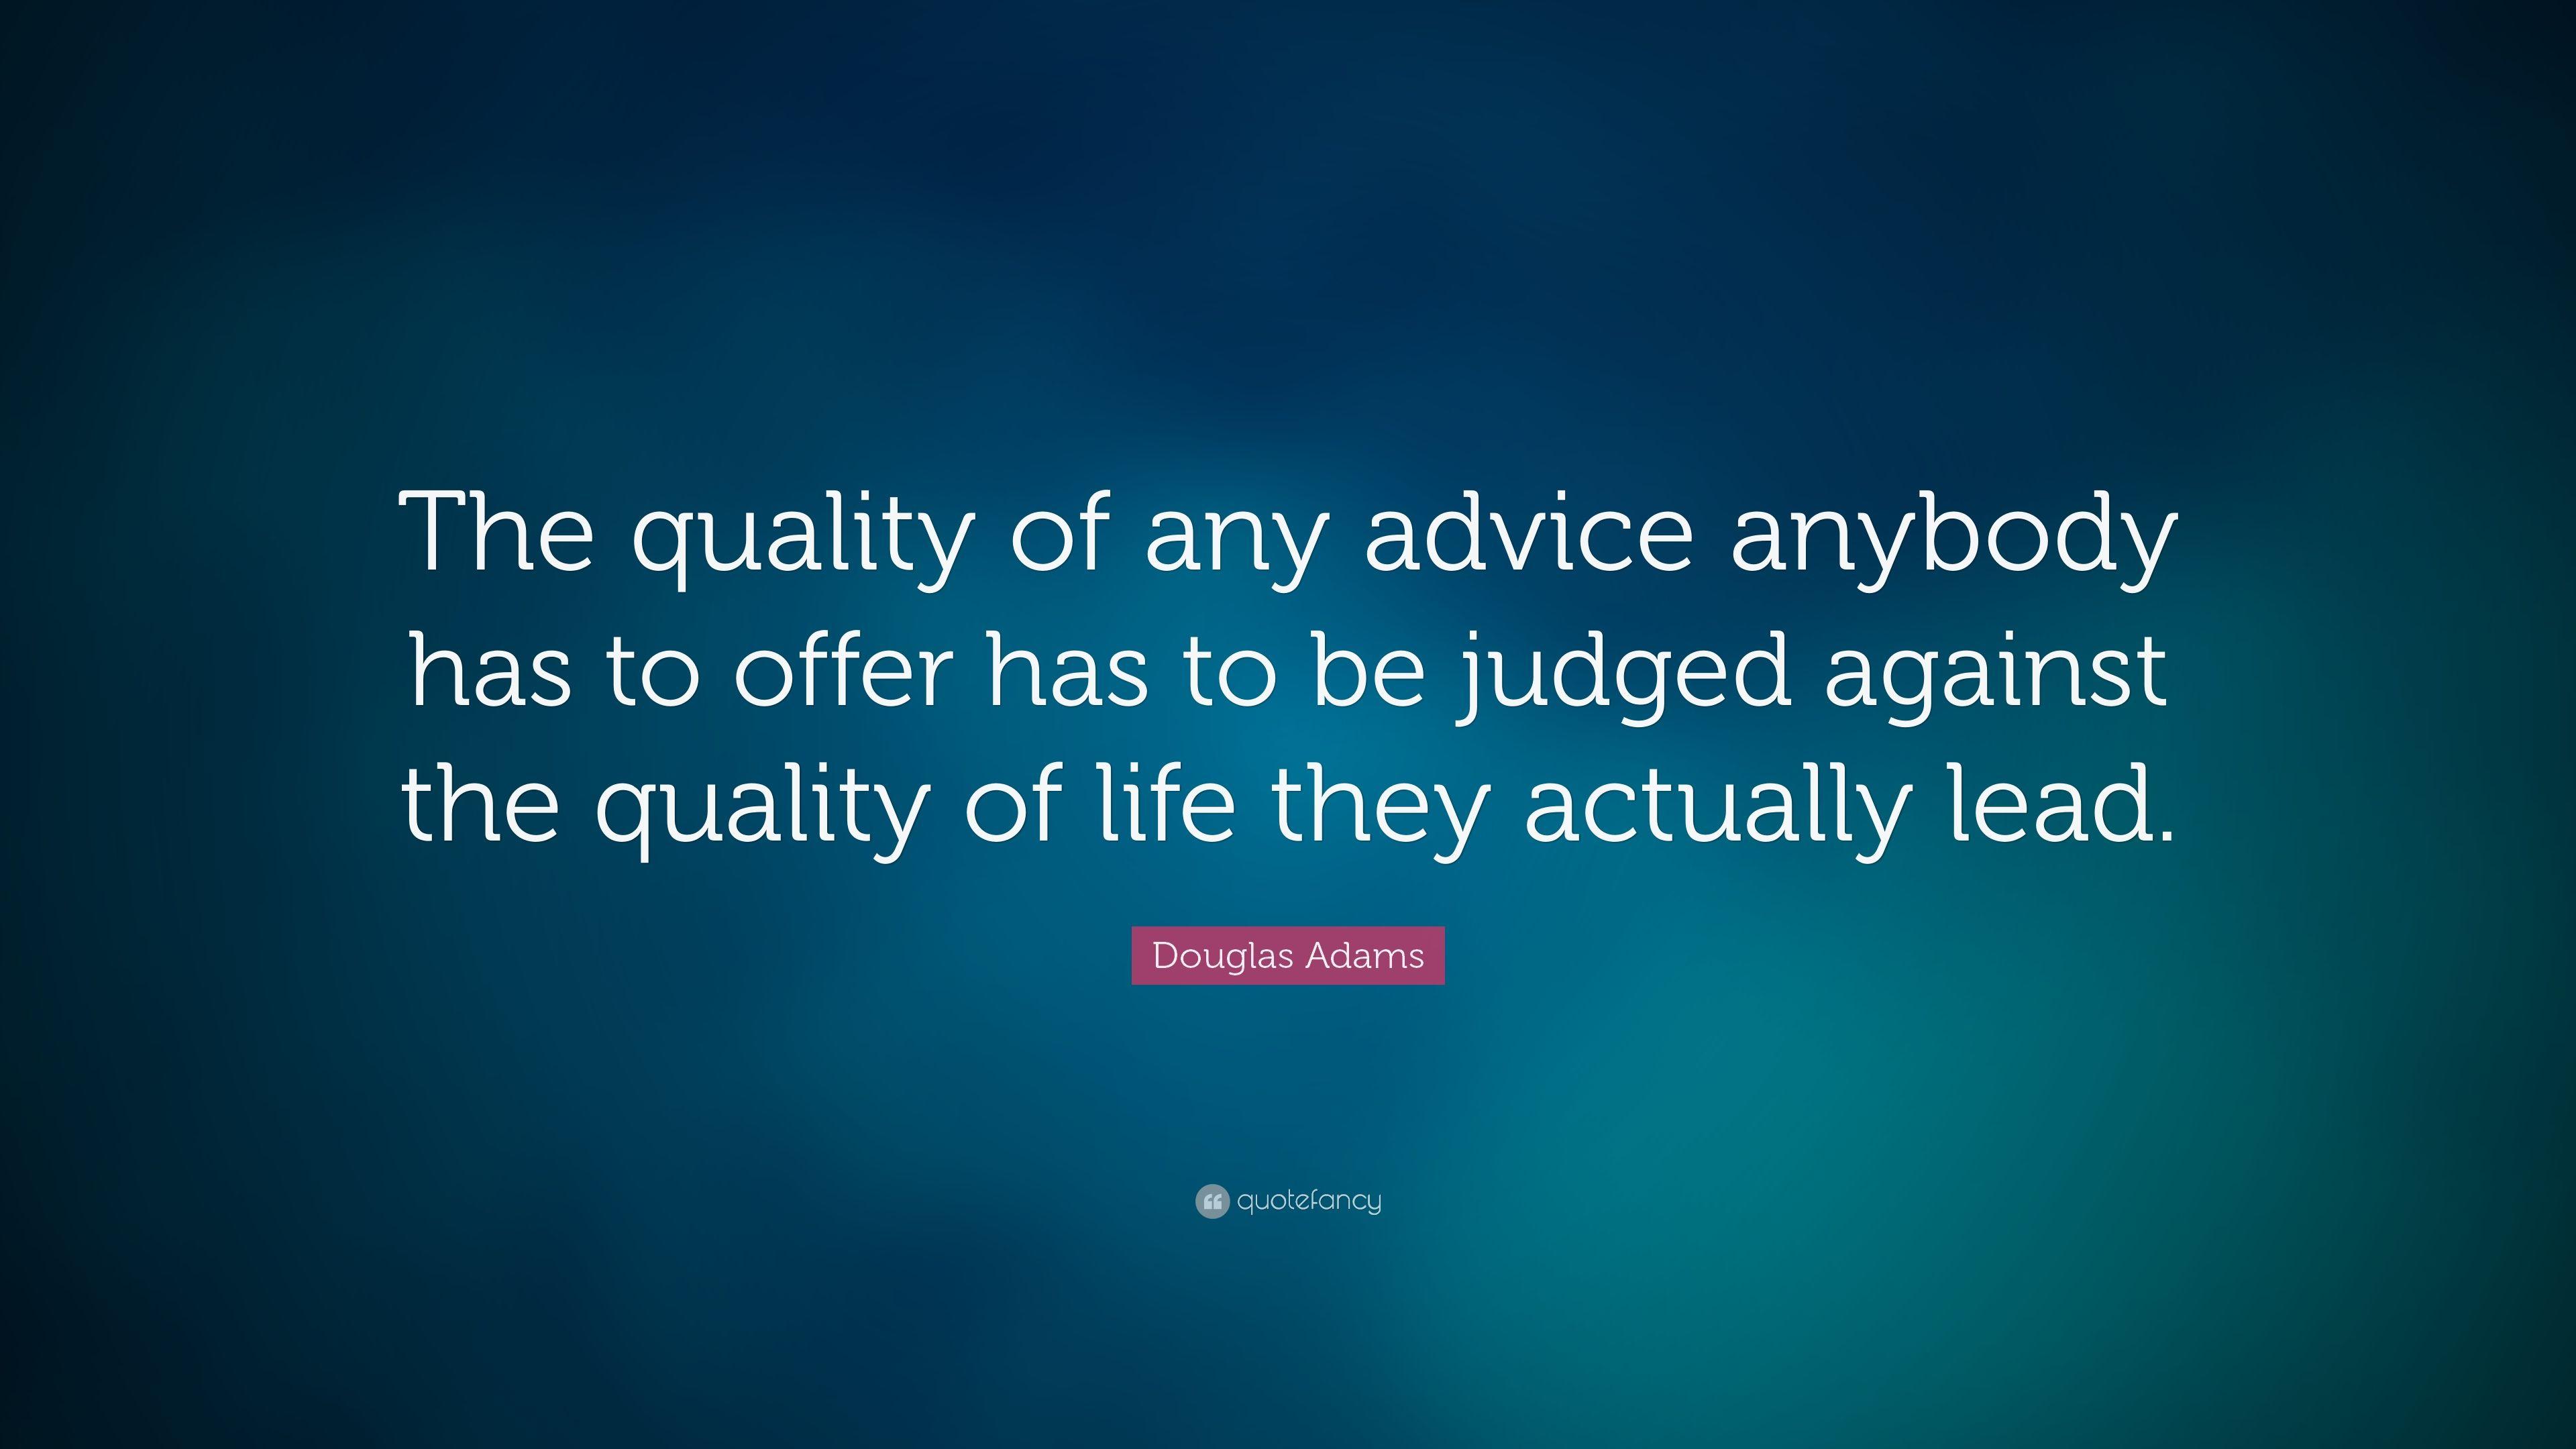 Douglas Adams Quote: “The quality of any advice anybody has to